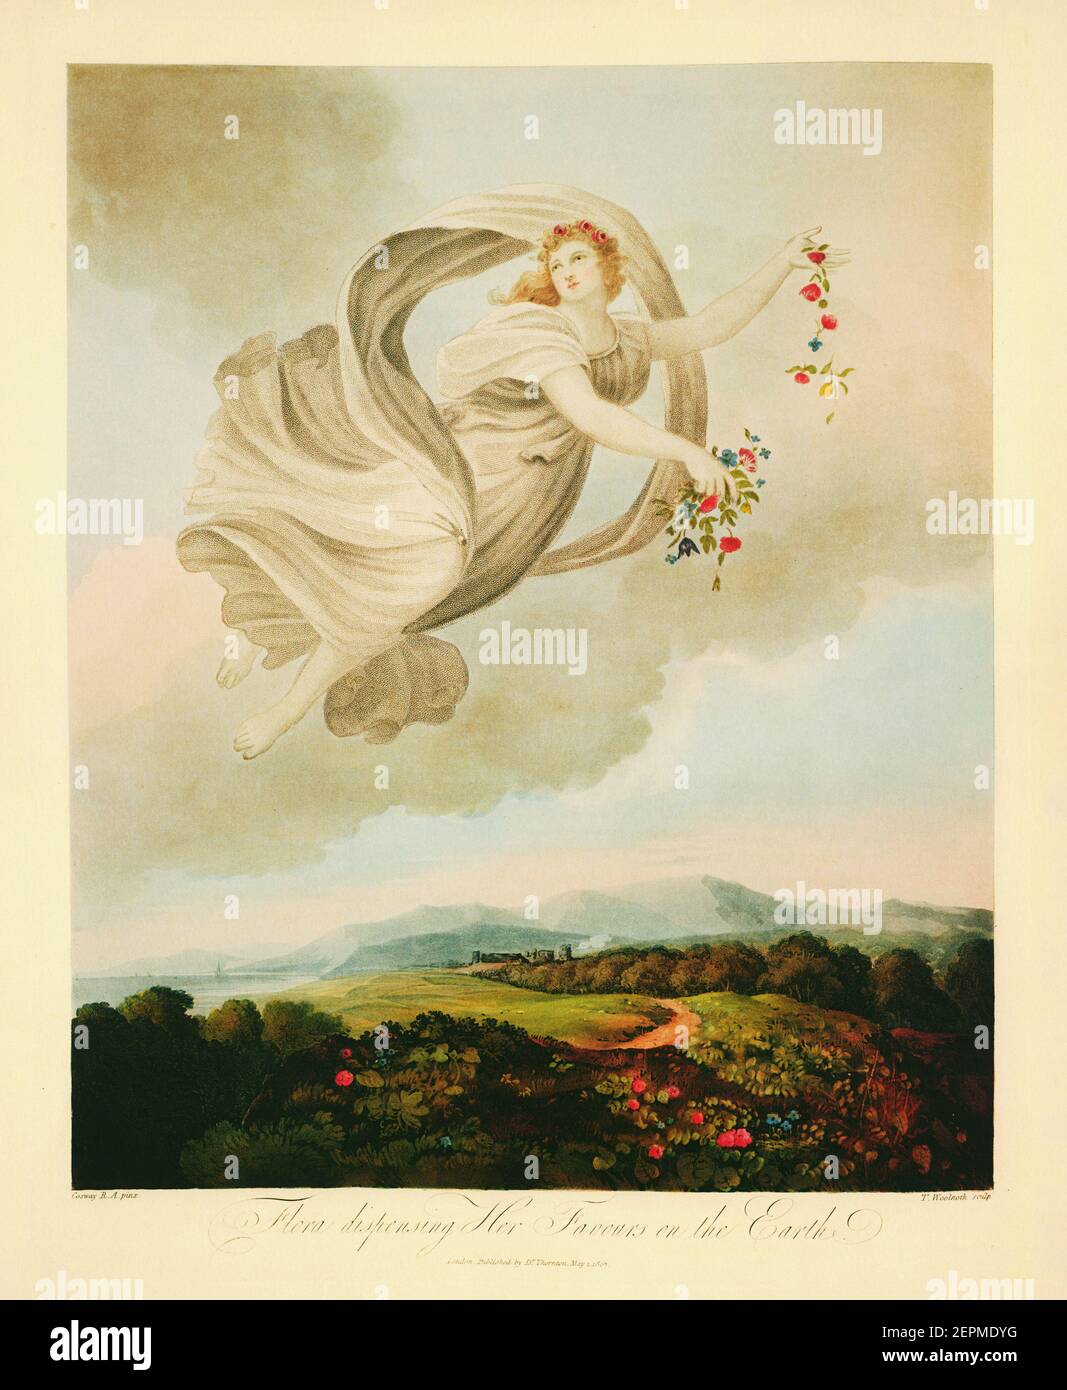 Godess Flora Dispensing Her Favours on the Earth. Published by Robert John Thornton (1768-1837), an English physician and botanical writer. Stock Photo